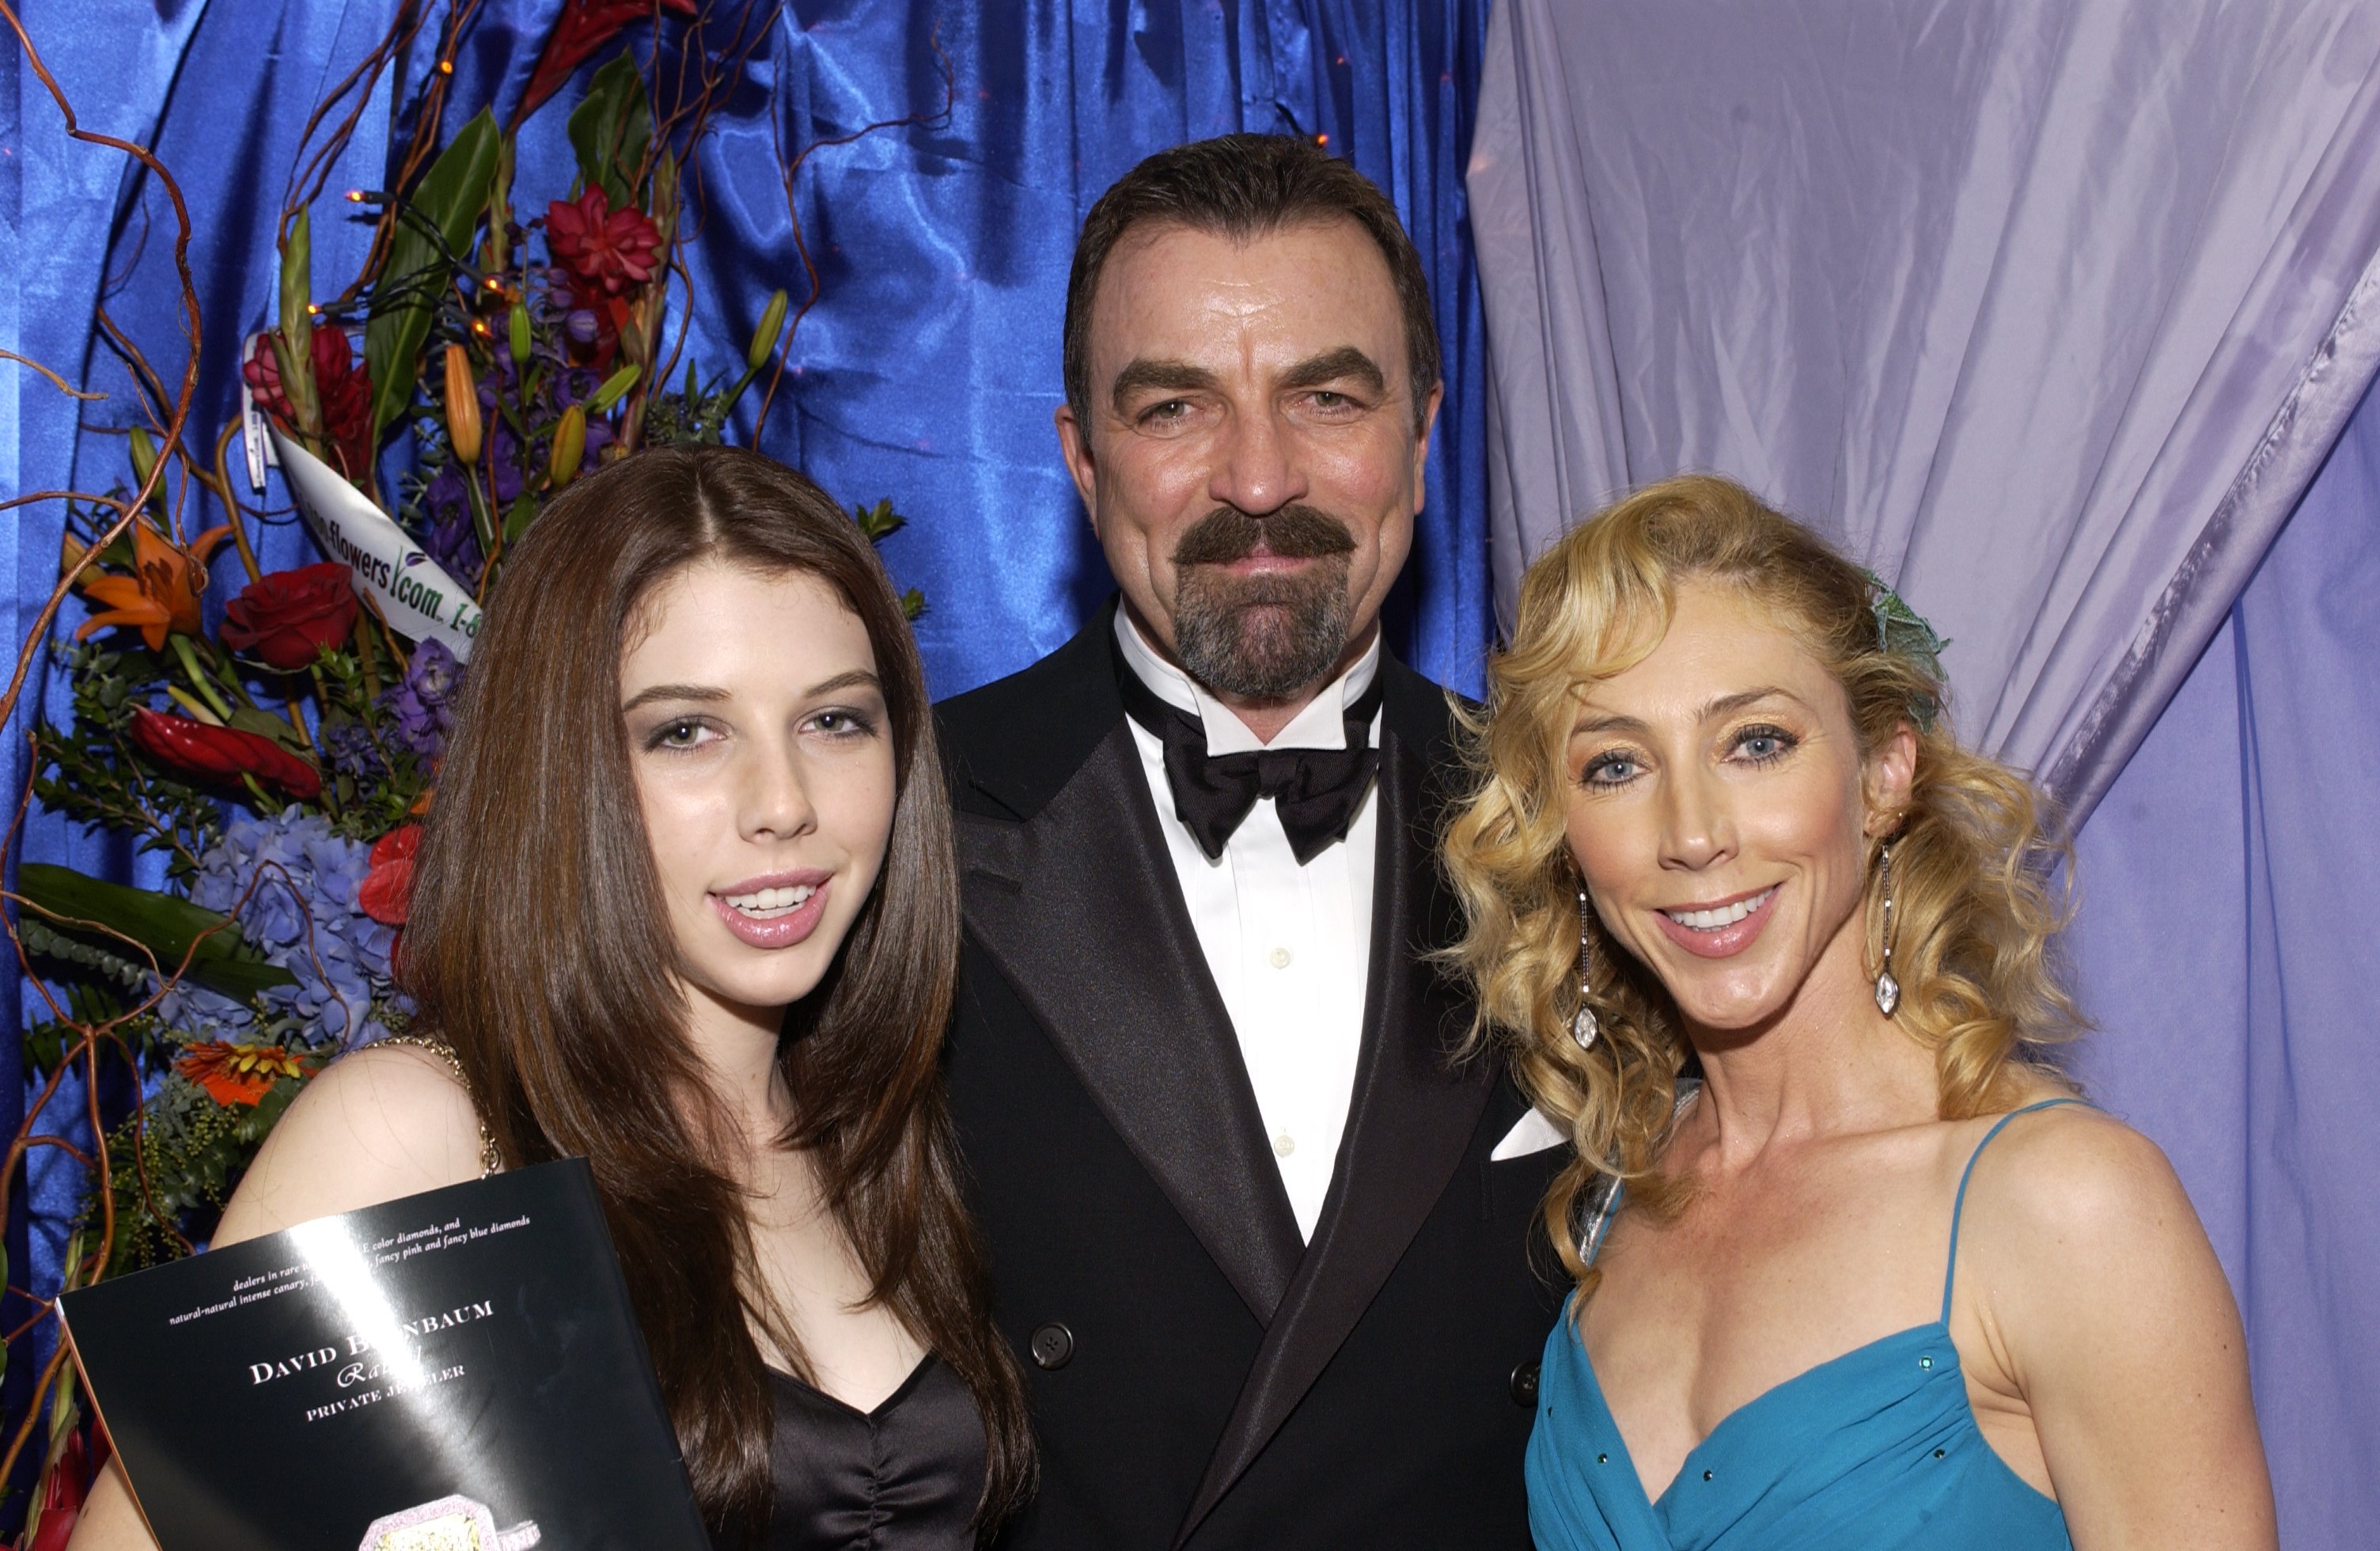 Tom Selleck with daughter Hannah and wife Jillie Mack are seen at the Distinctive Assets Gift Lounge during the People's Choice Awards at the Pasadena Civic Auditorium on January 9, 2005 in Pasadena, California | Photo: Getty Images